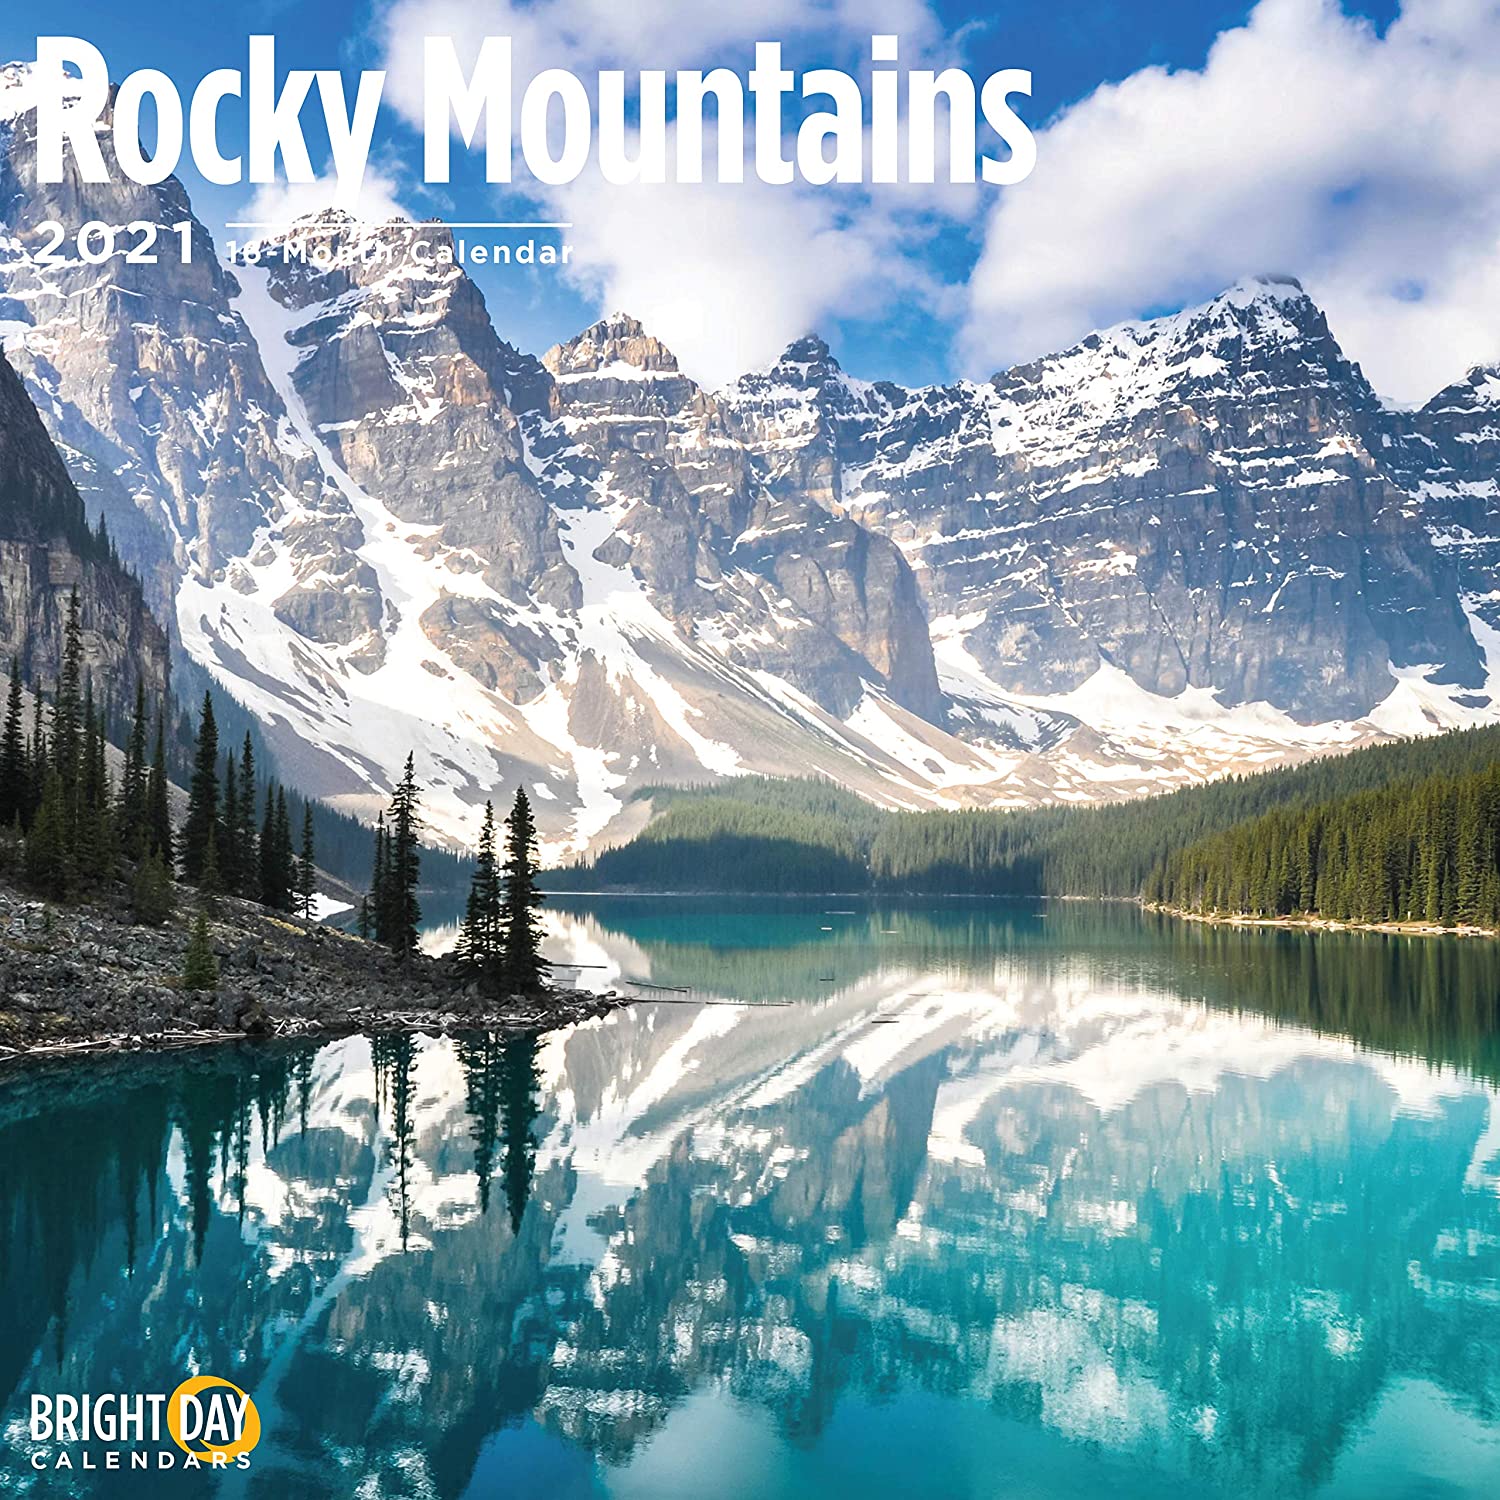 2021 Rocky Mountains Wall Calendar by Bright Day, 12 x 12 Inch